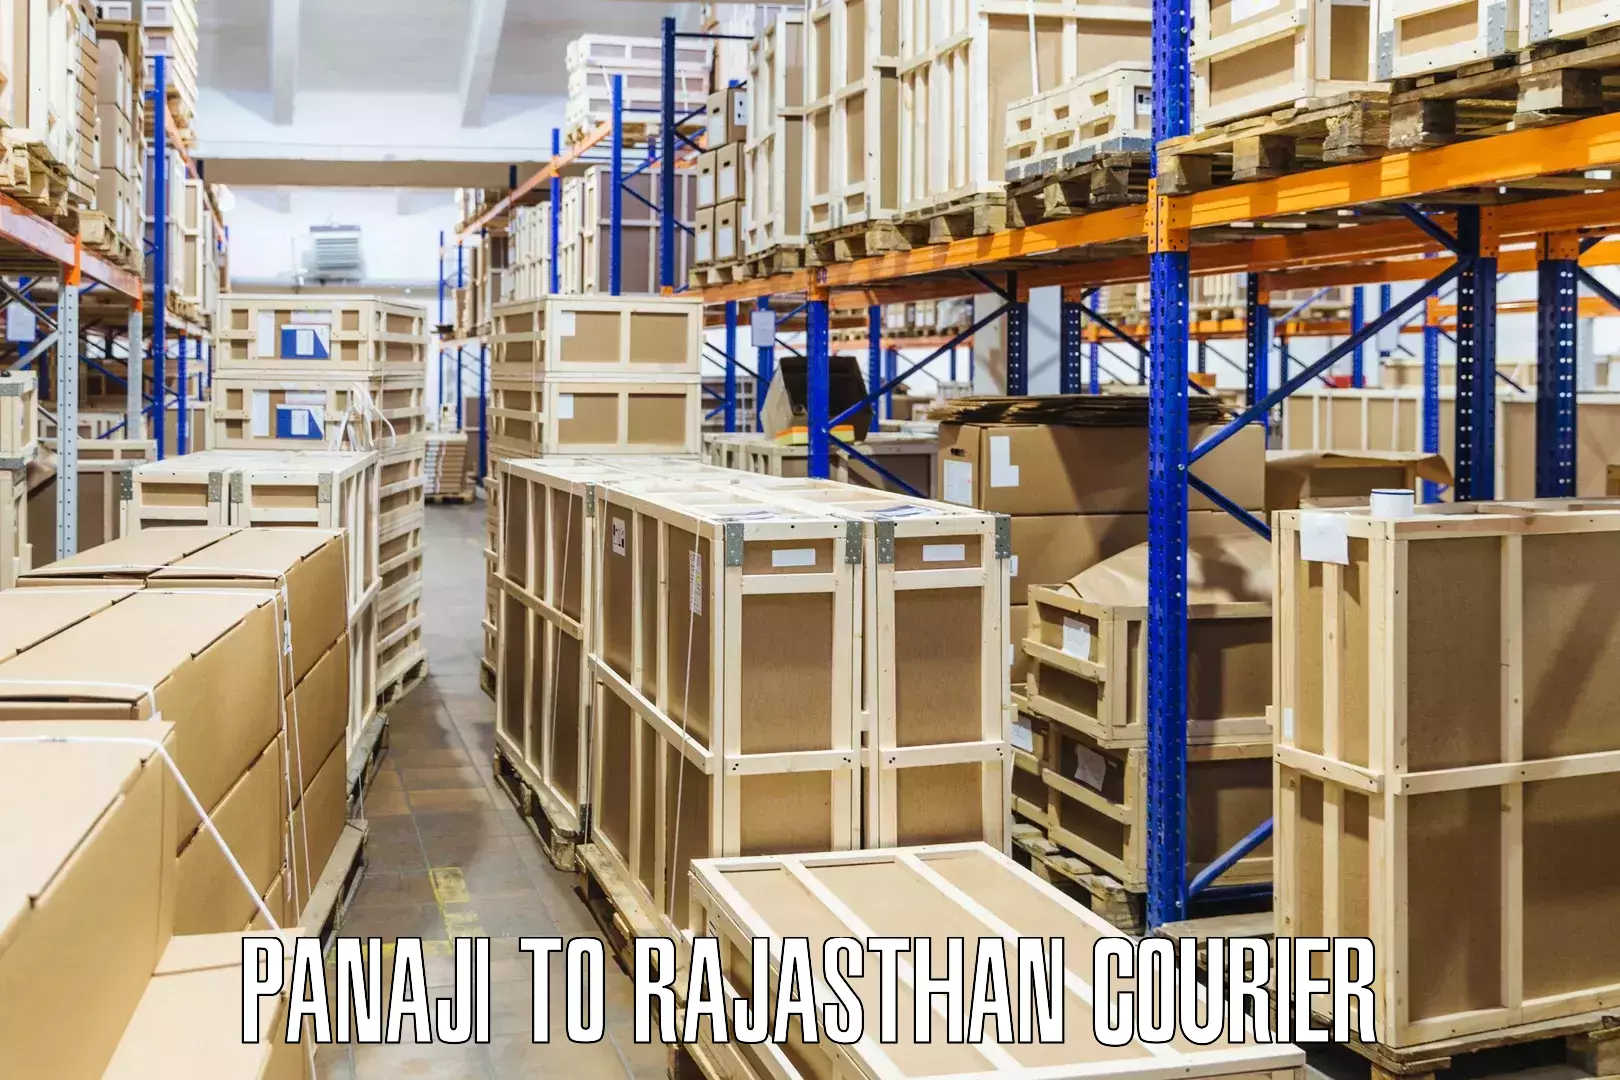 State-of-the-art courier technology Panaji to Rajasthan